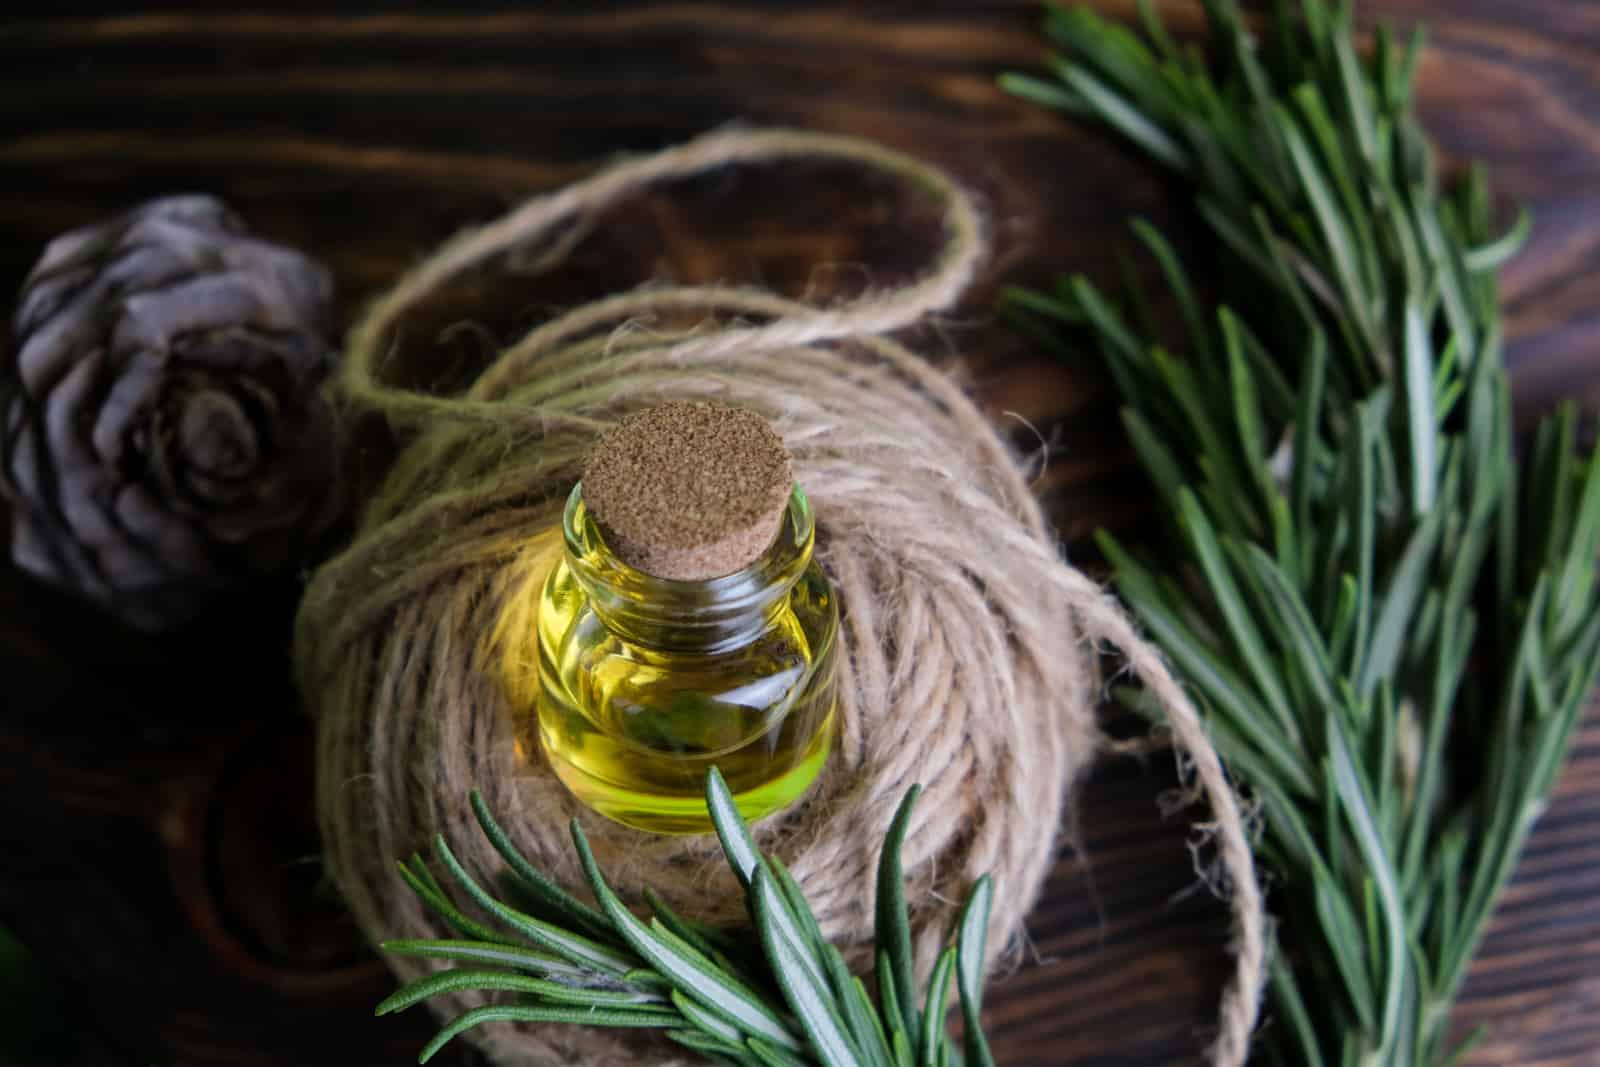 Rosemary essential oil jar glass bottle and branches of plant rosemary with flowers on rustic background